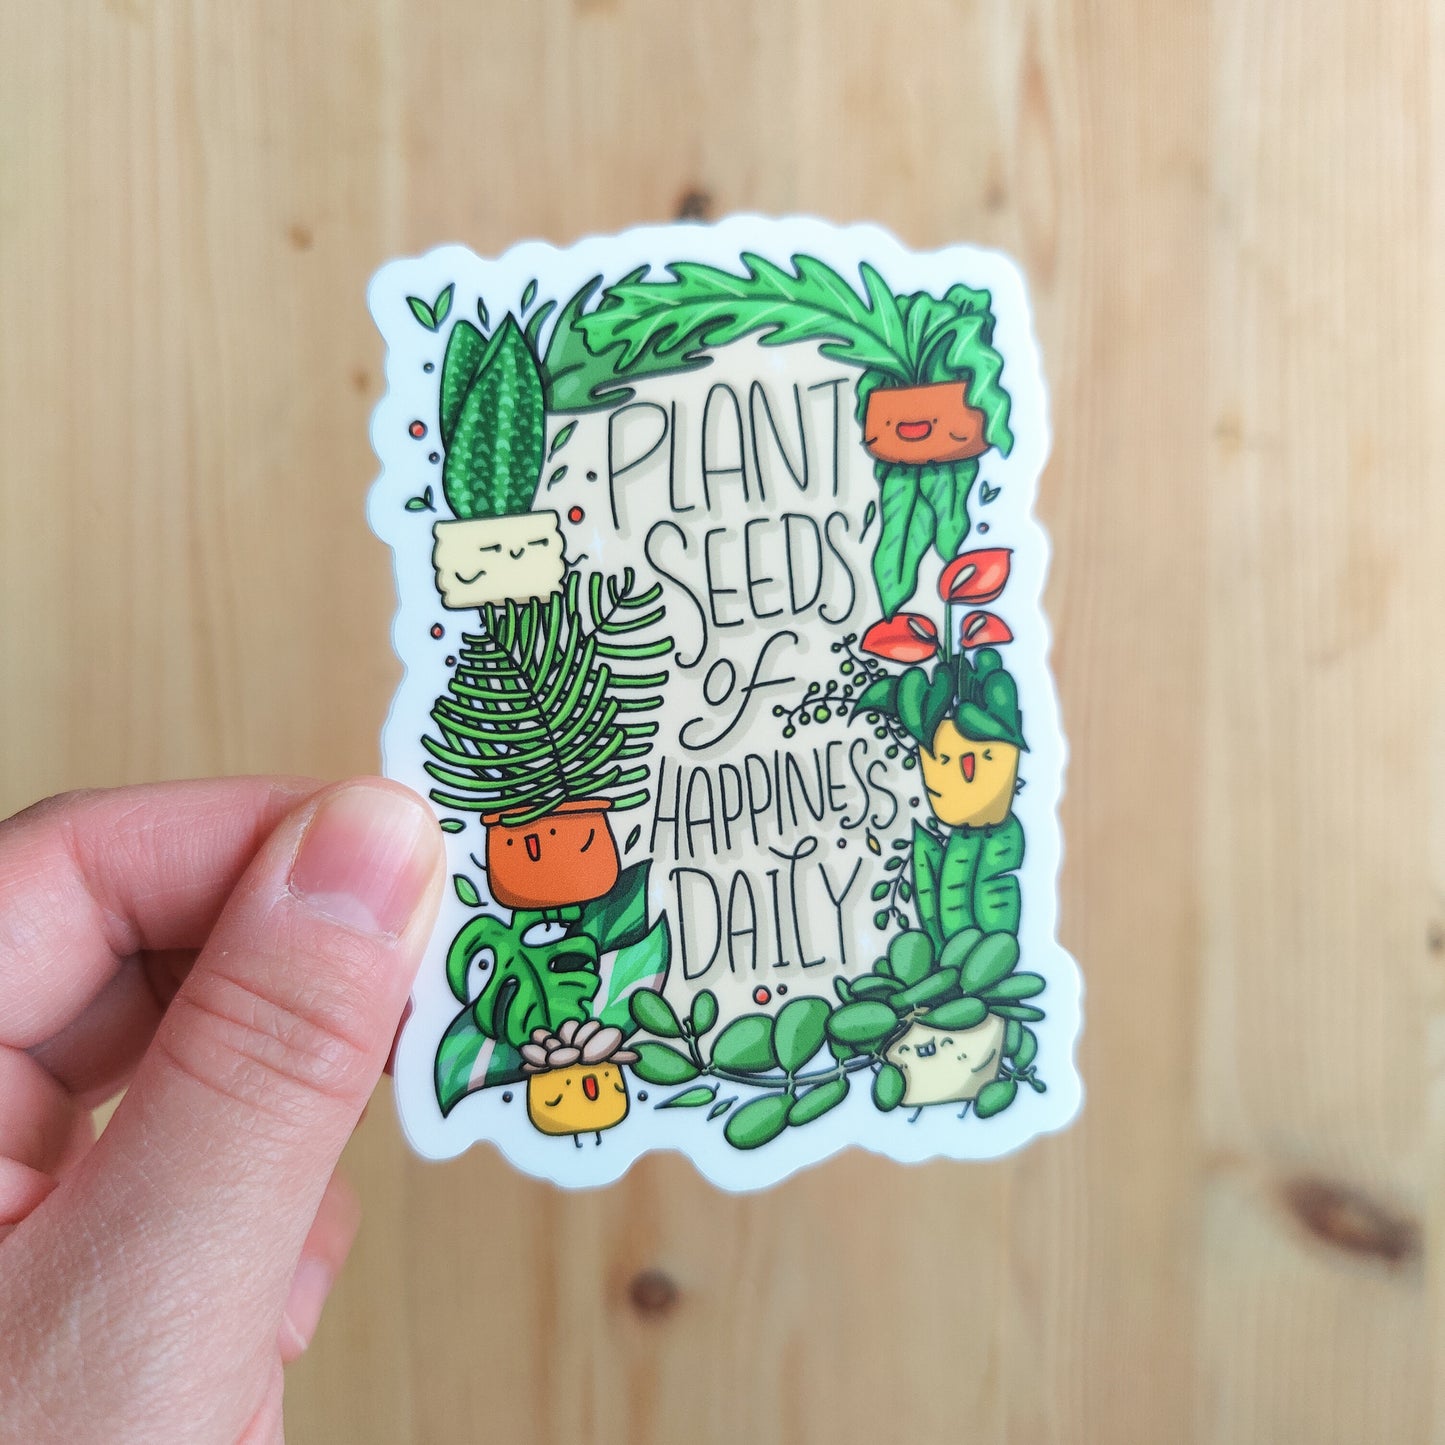 Plant seeds of Happiness Daily Vinyl Sticker